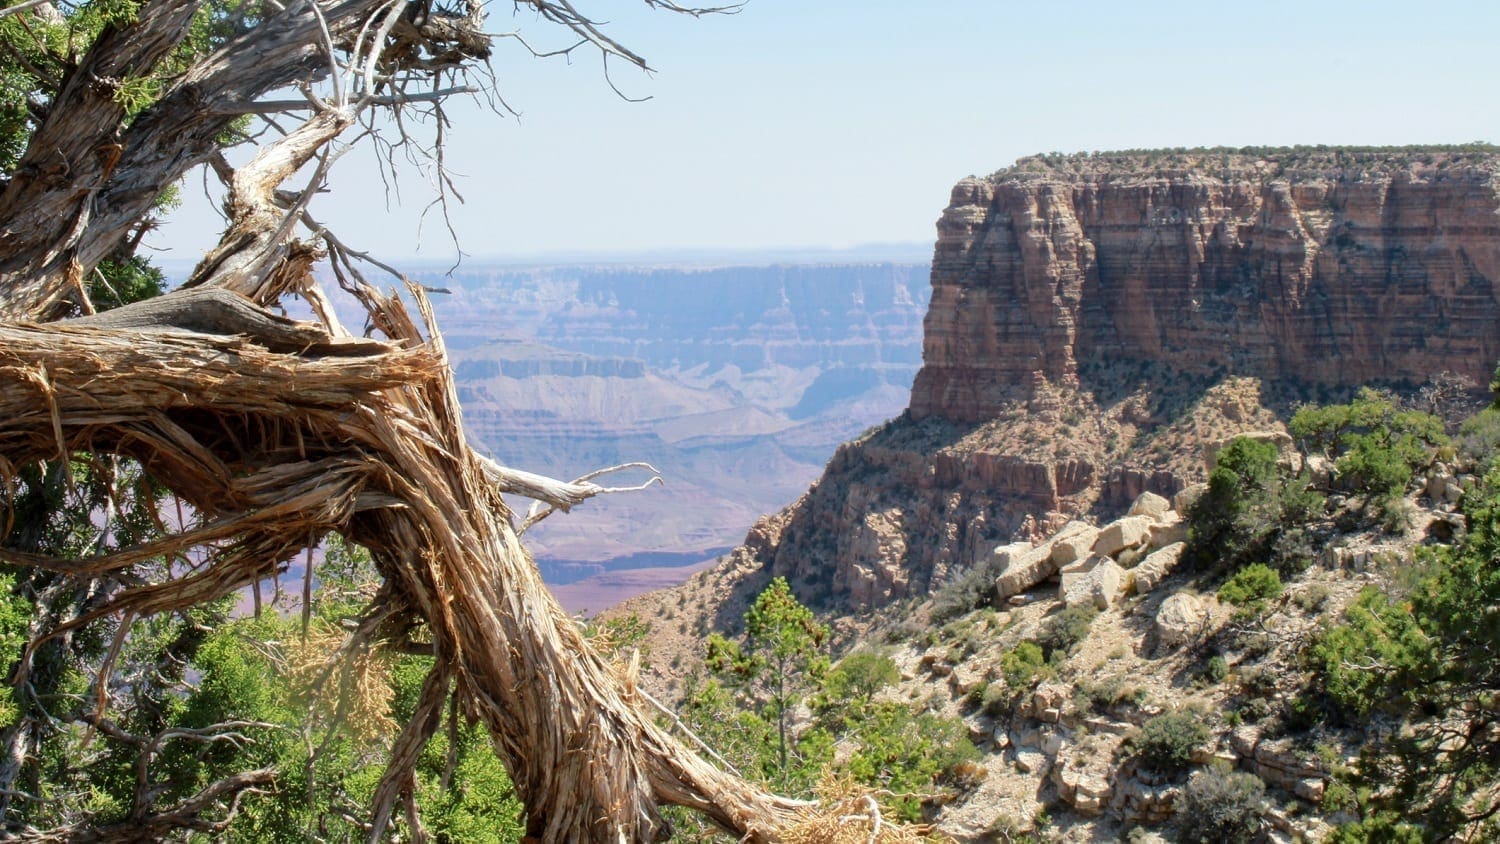 Grand Canyon view with broken dead tree in foreground: Photo 27825853 © Gary Arbach | Dreamstime.com